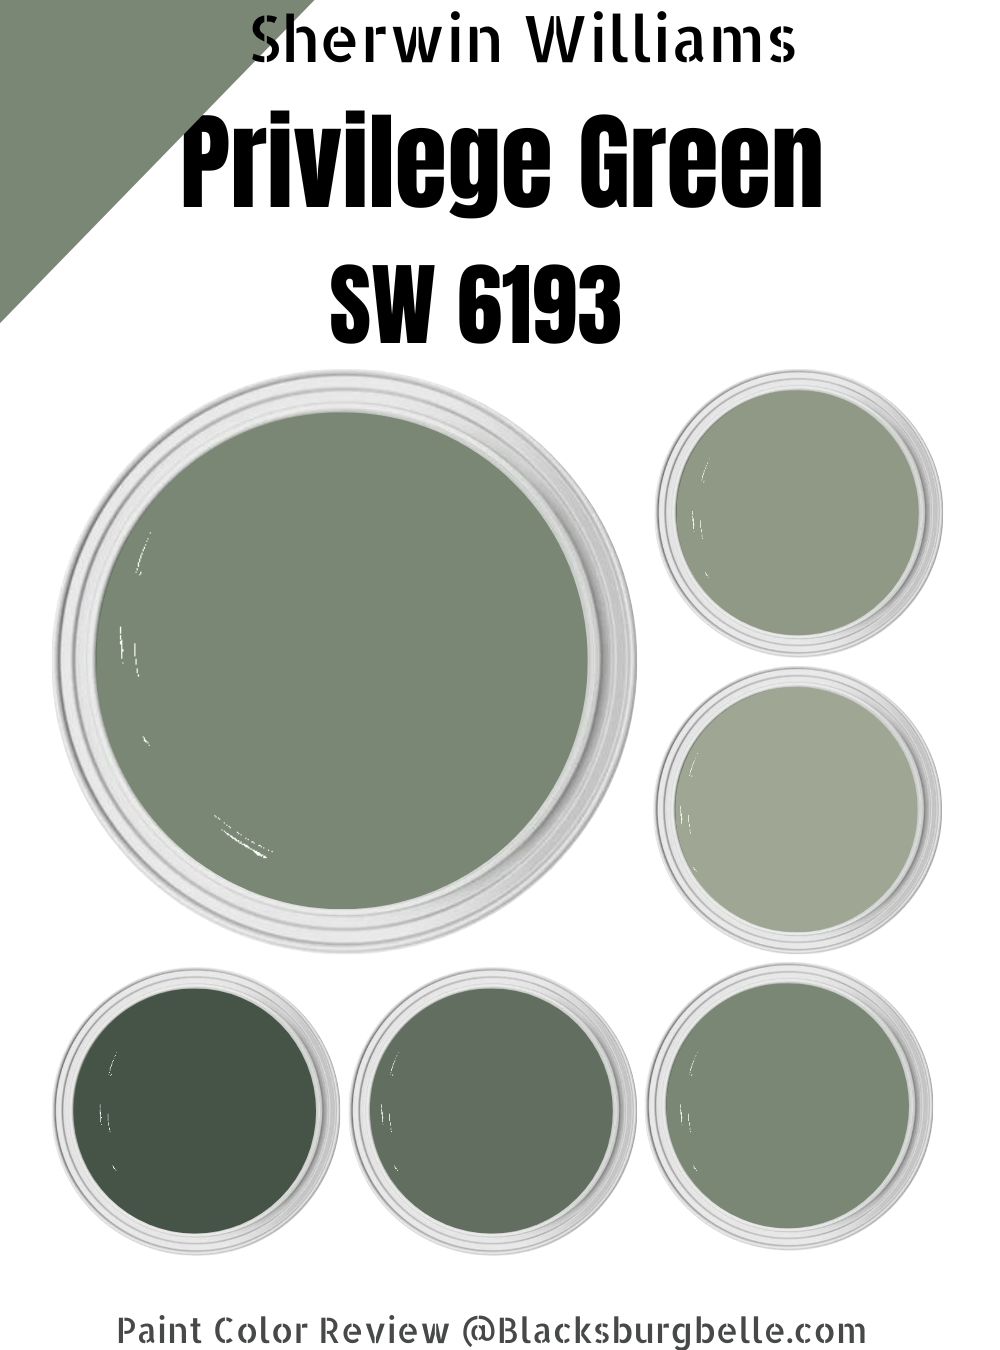 Sherwin Williams Privilege Green (SW 6193) Paint Color Review